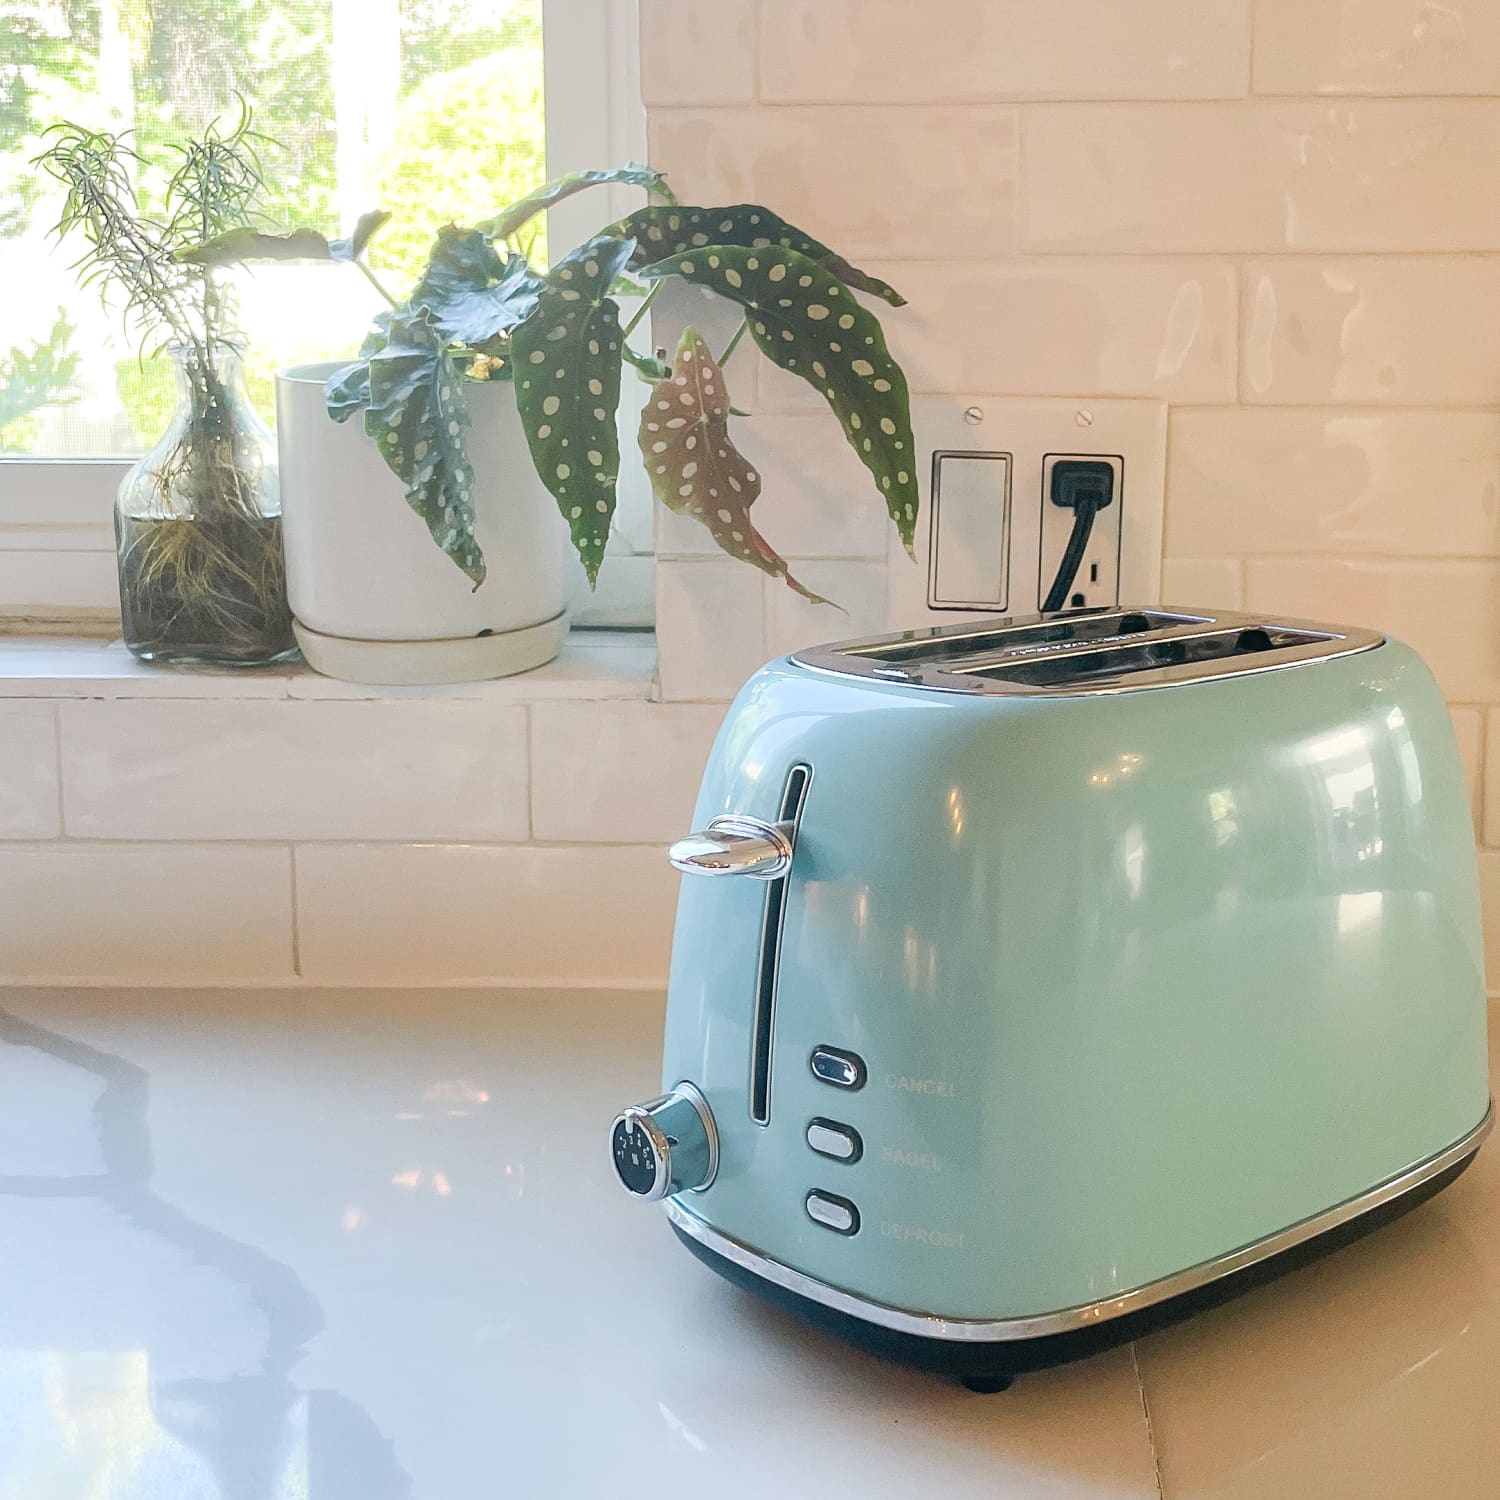 https://cdn.apartmenttherapy.info/image/upload/f_jpg,q_auto:eco,c_fill,g_auto,w_1500,ar_1:1/k%2FEdit%2F2022-11-Galanz%20Retro%20Toaster%20Review%2FGalanz_Retro_Toaster_Wendy_Gould